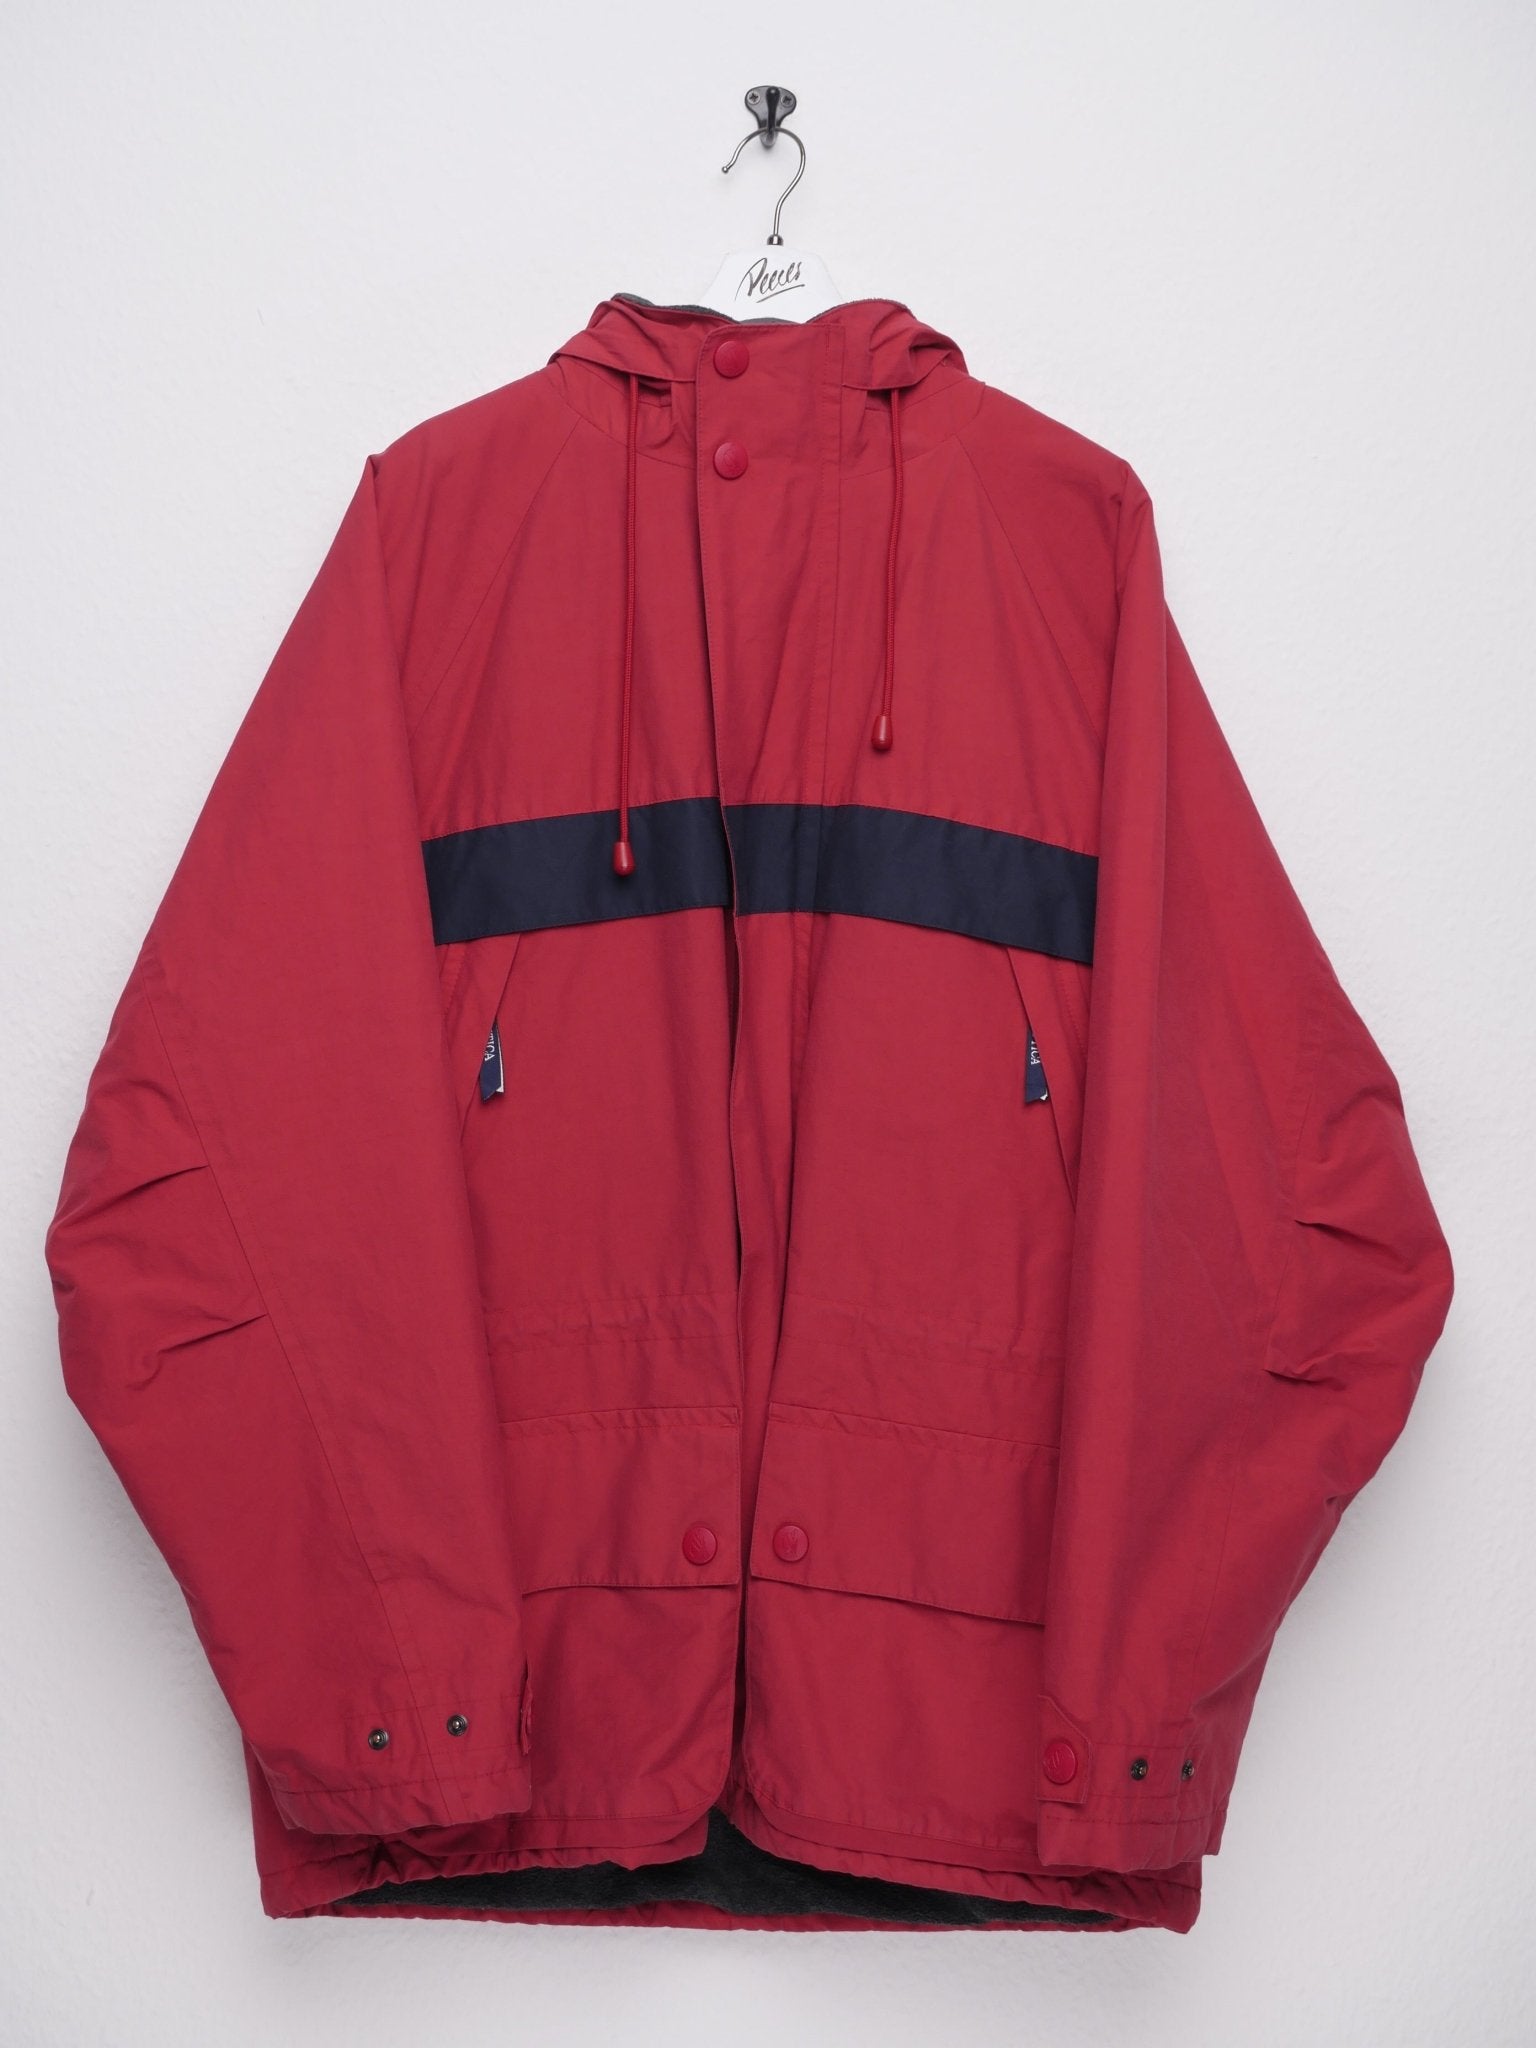 Nautica patched two toned Heavy Jacke - Peeces